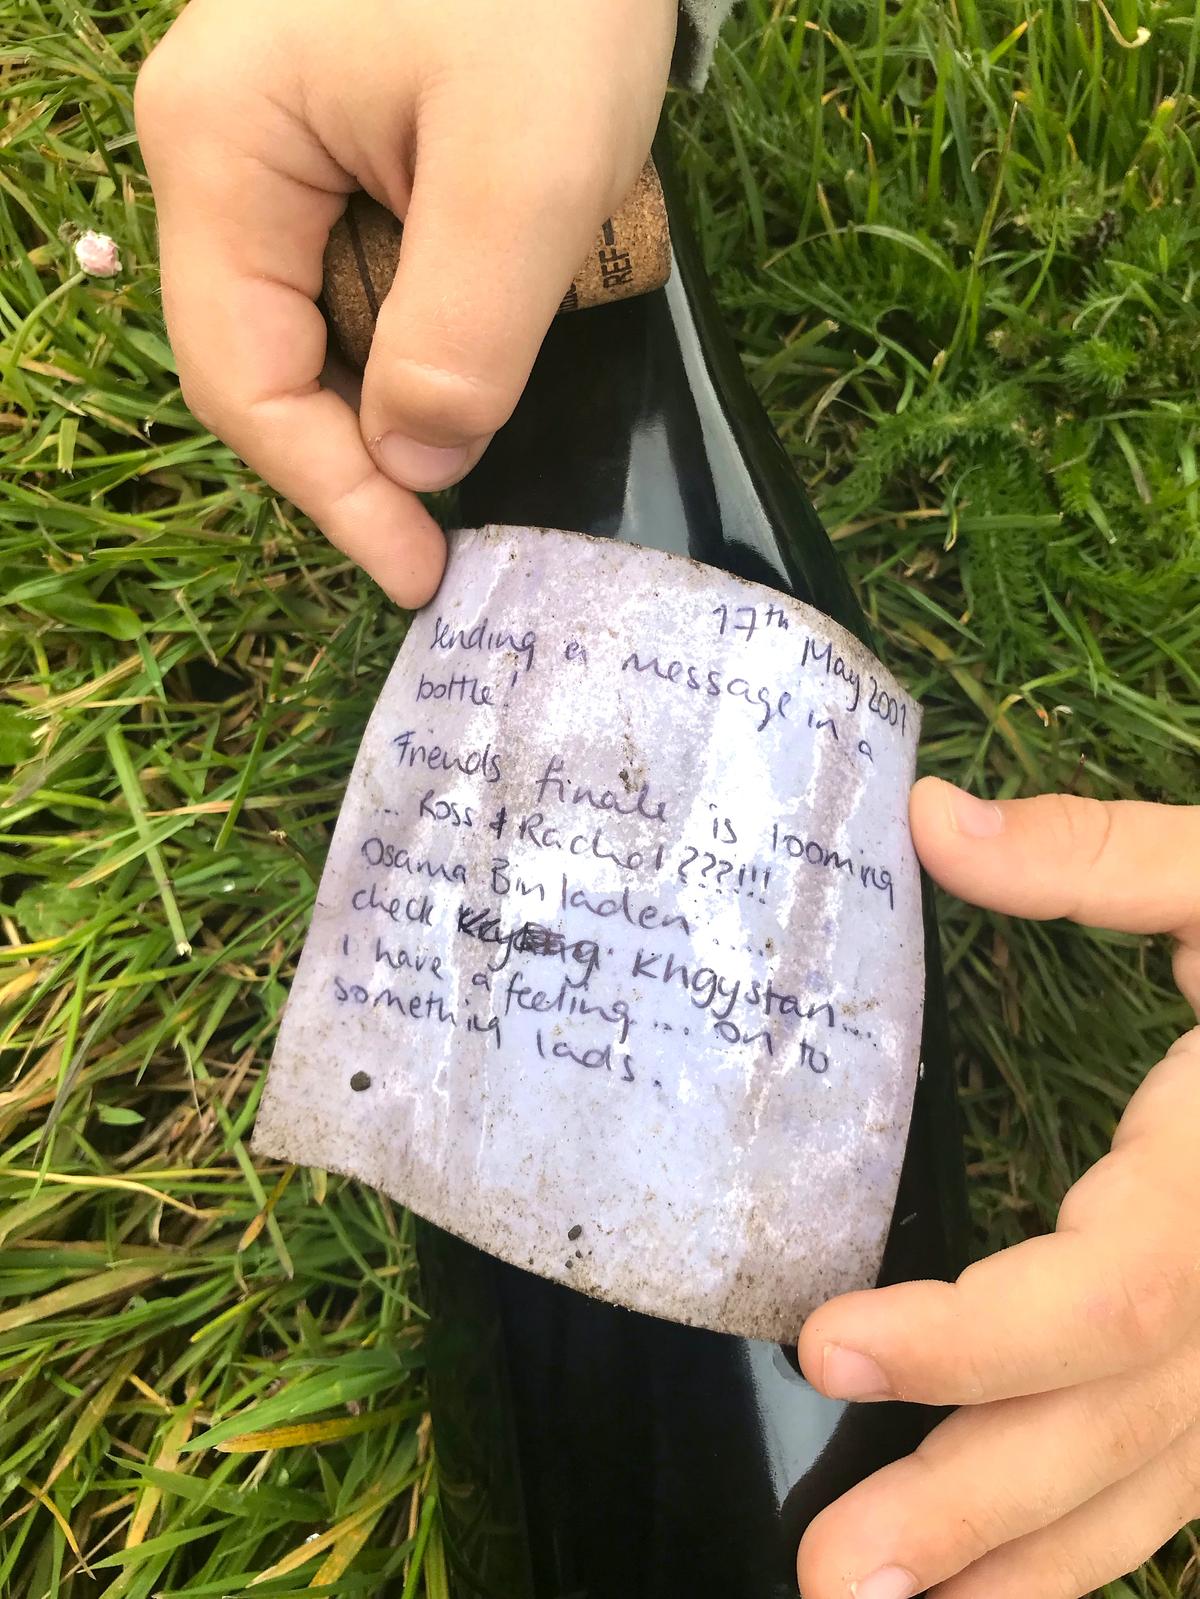 A mysterious letter in a bottle dated from 2001 has washed up on a beach in Ireland - with a tip on Bin Laden’s possible whereabouts written inside. (©SWNS)